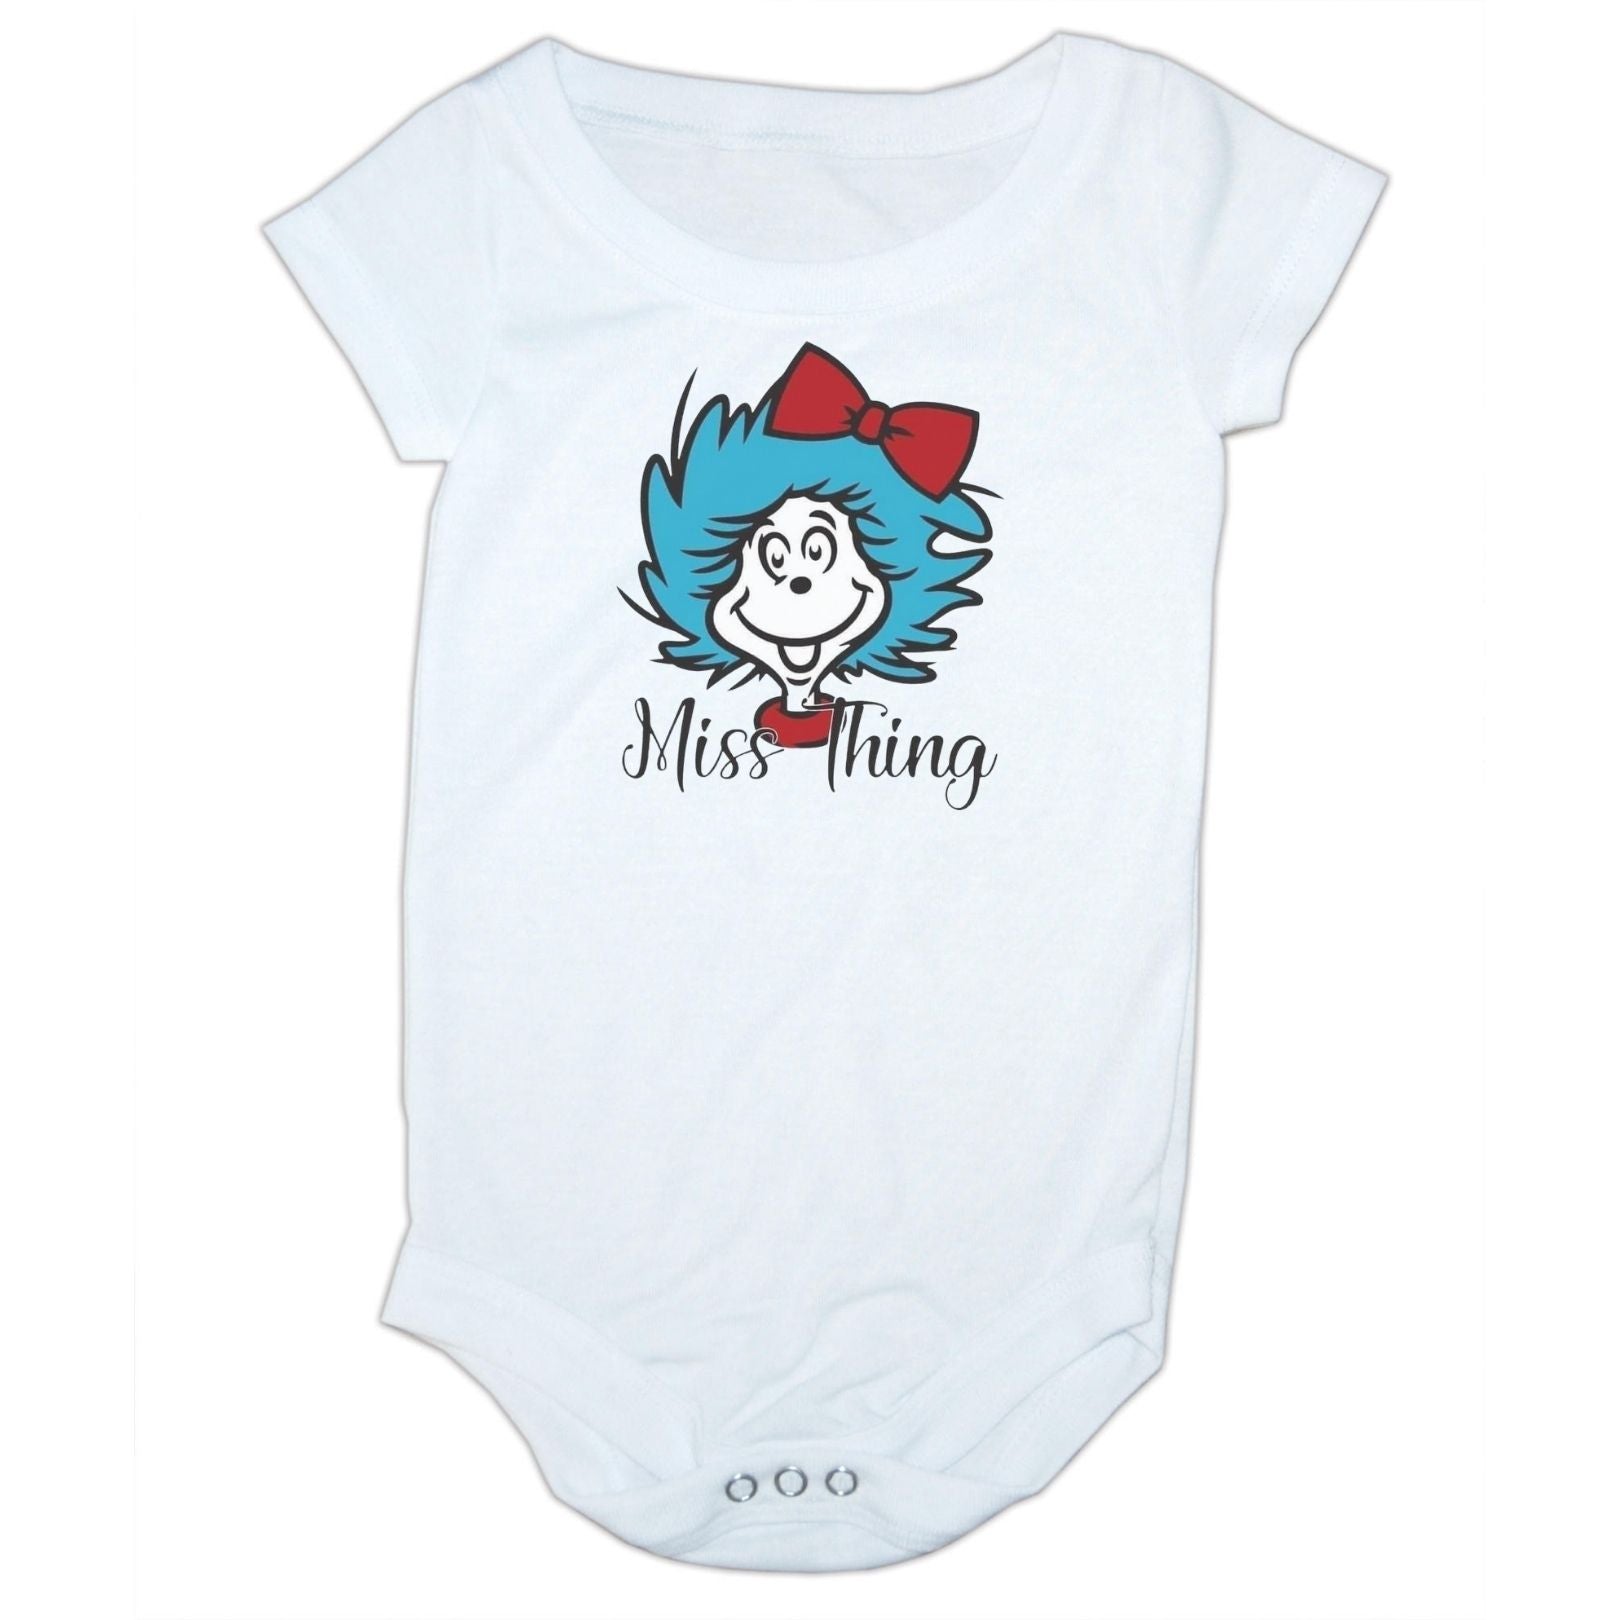 Miss thing infant toddler baby one piece bodysuit